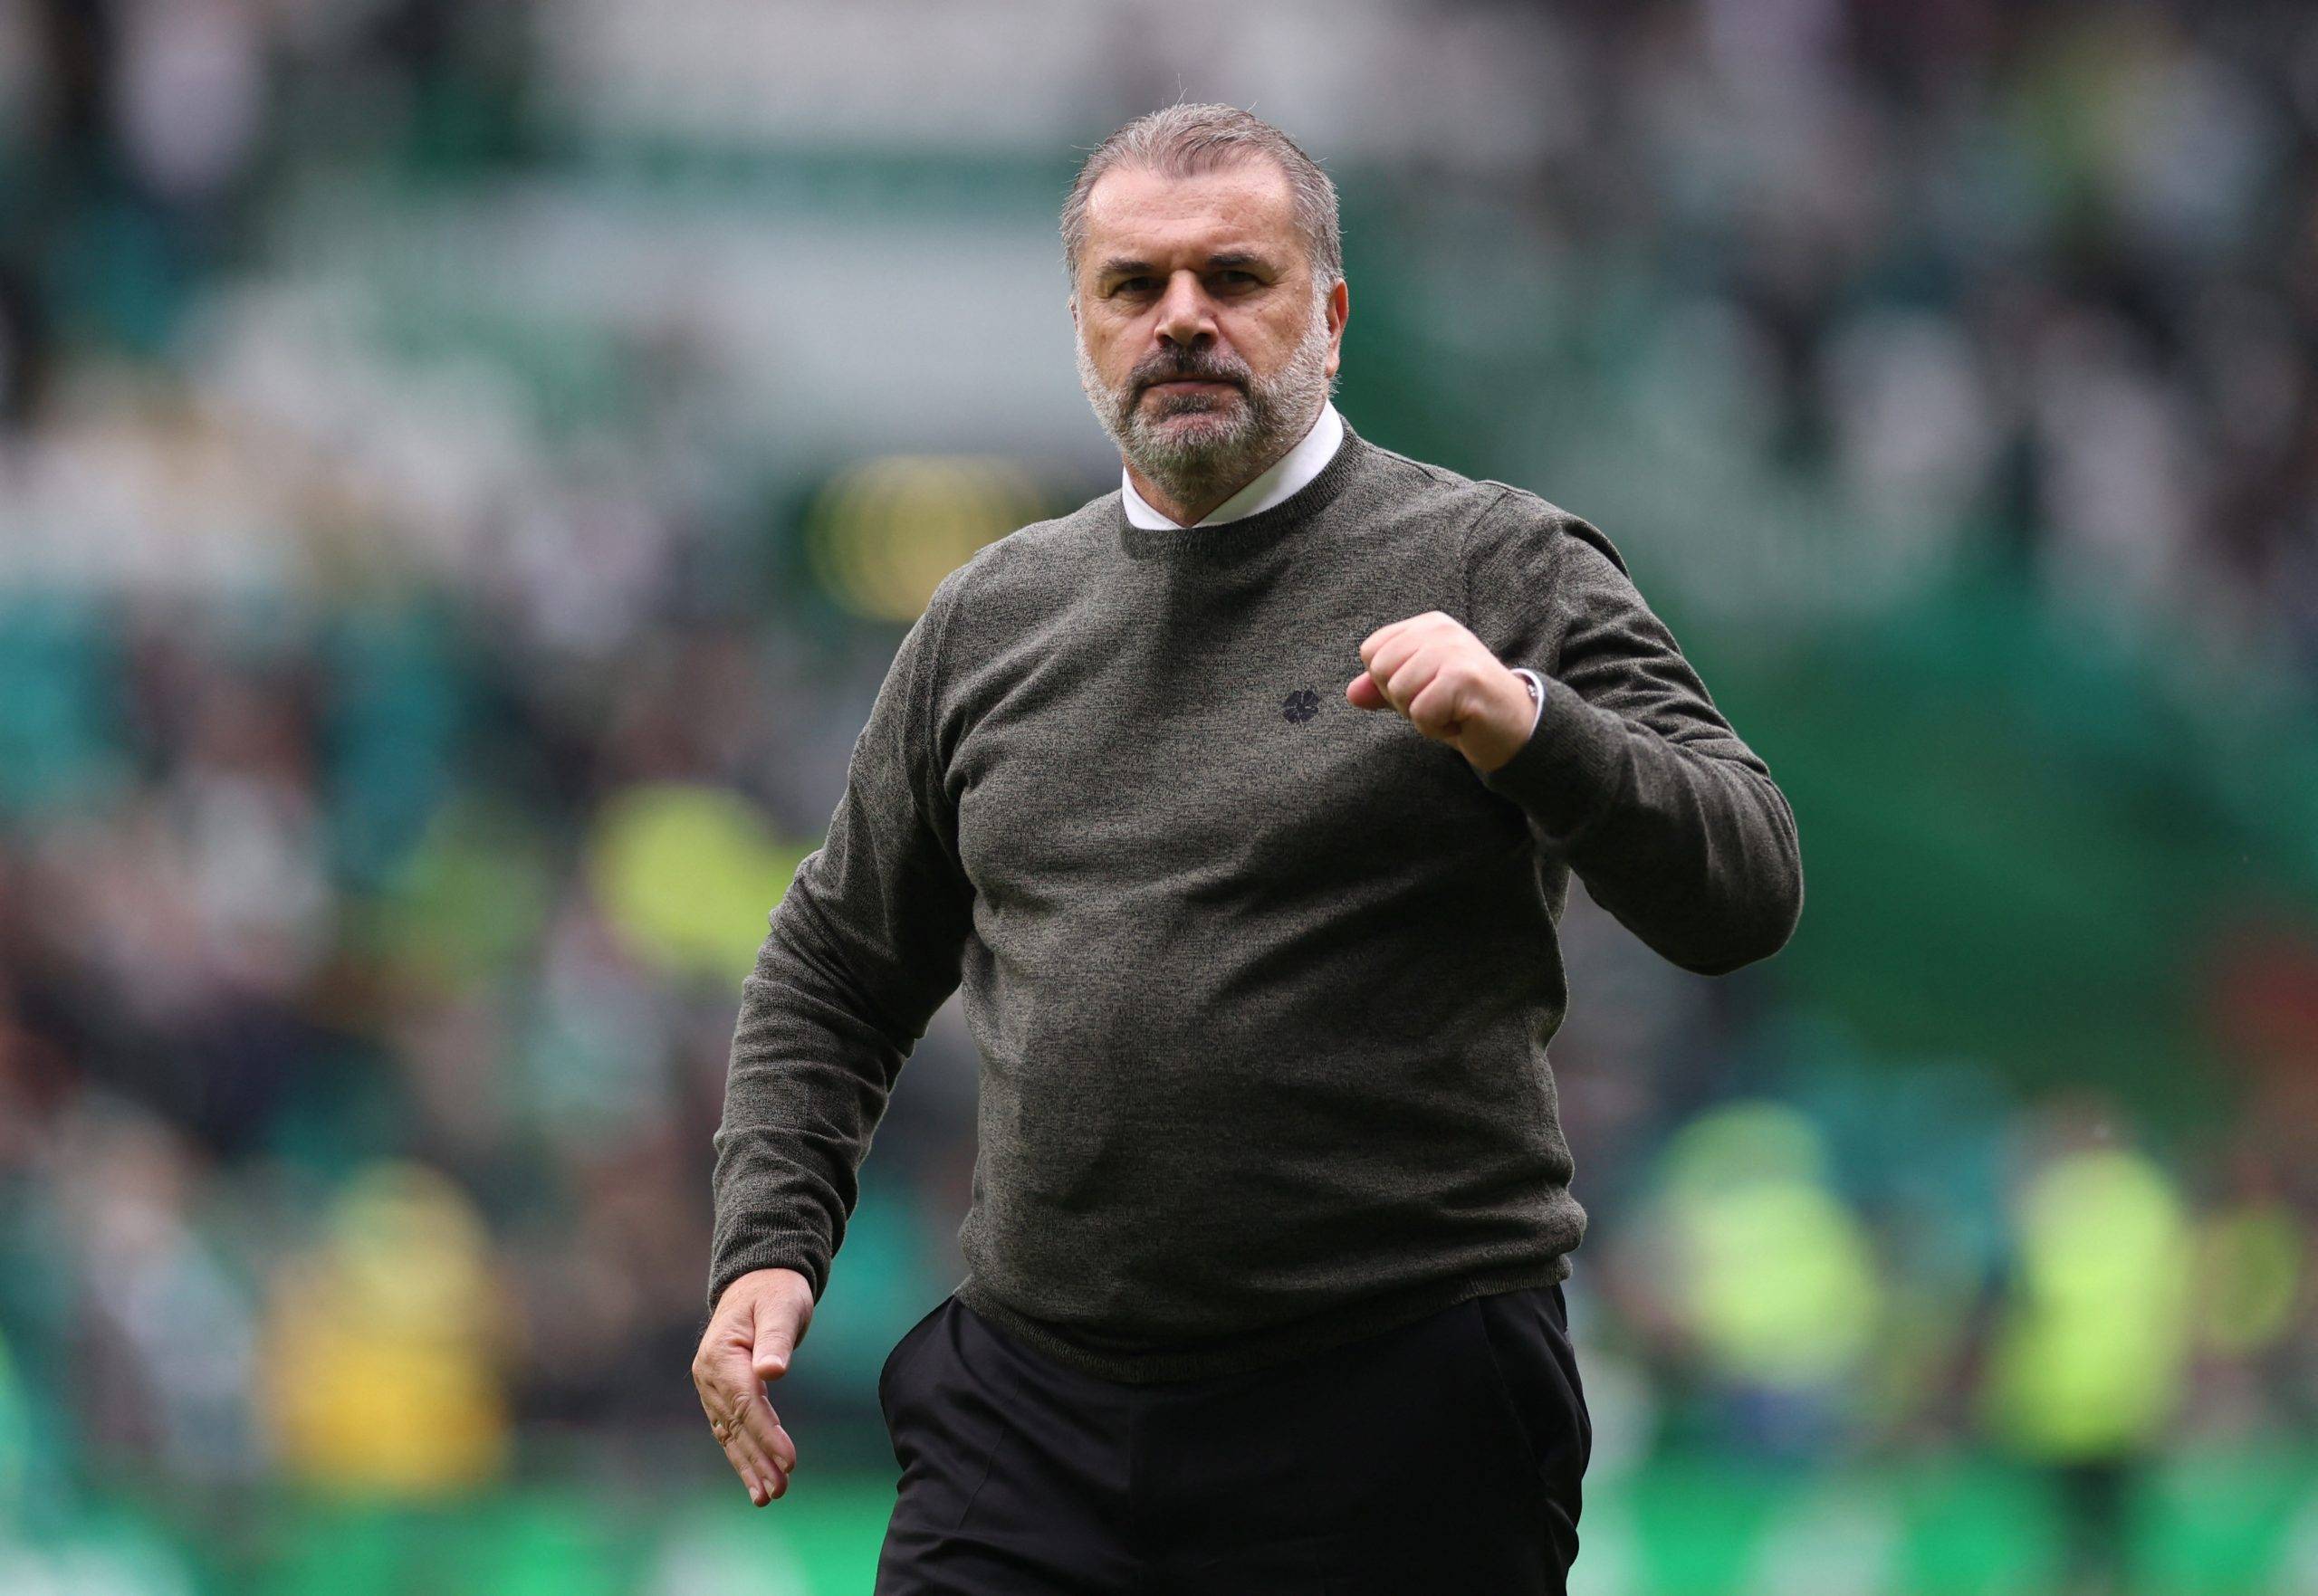 Celtic could receive 'record fees' for Hatate, Abada and Jota - Celtic News